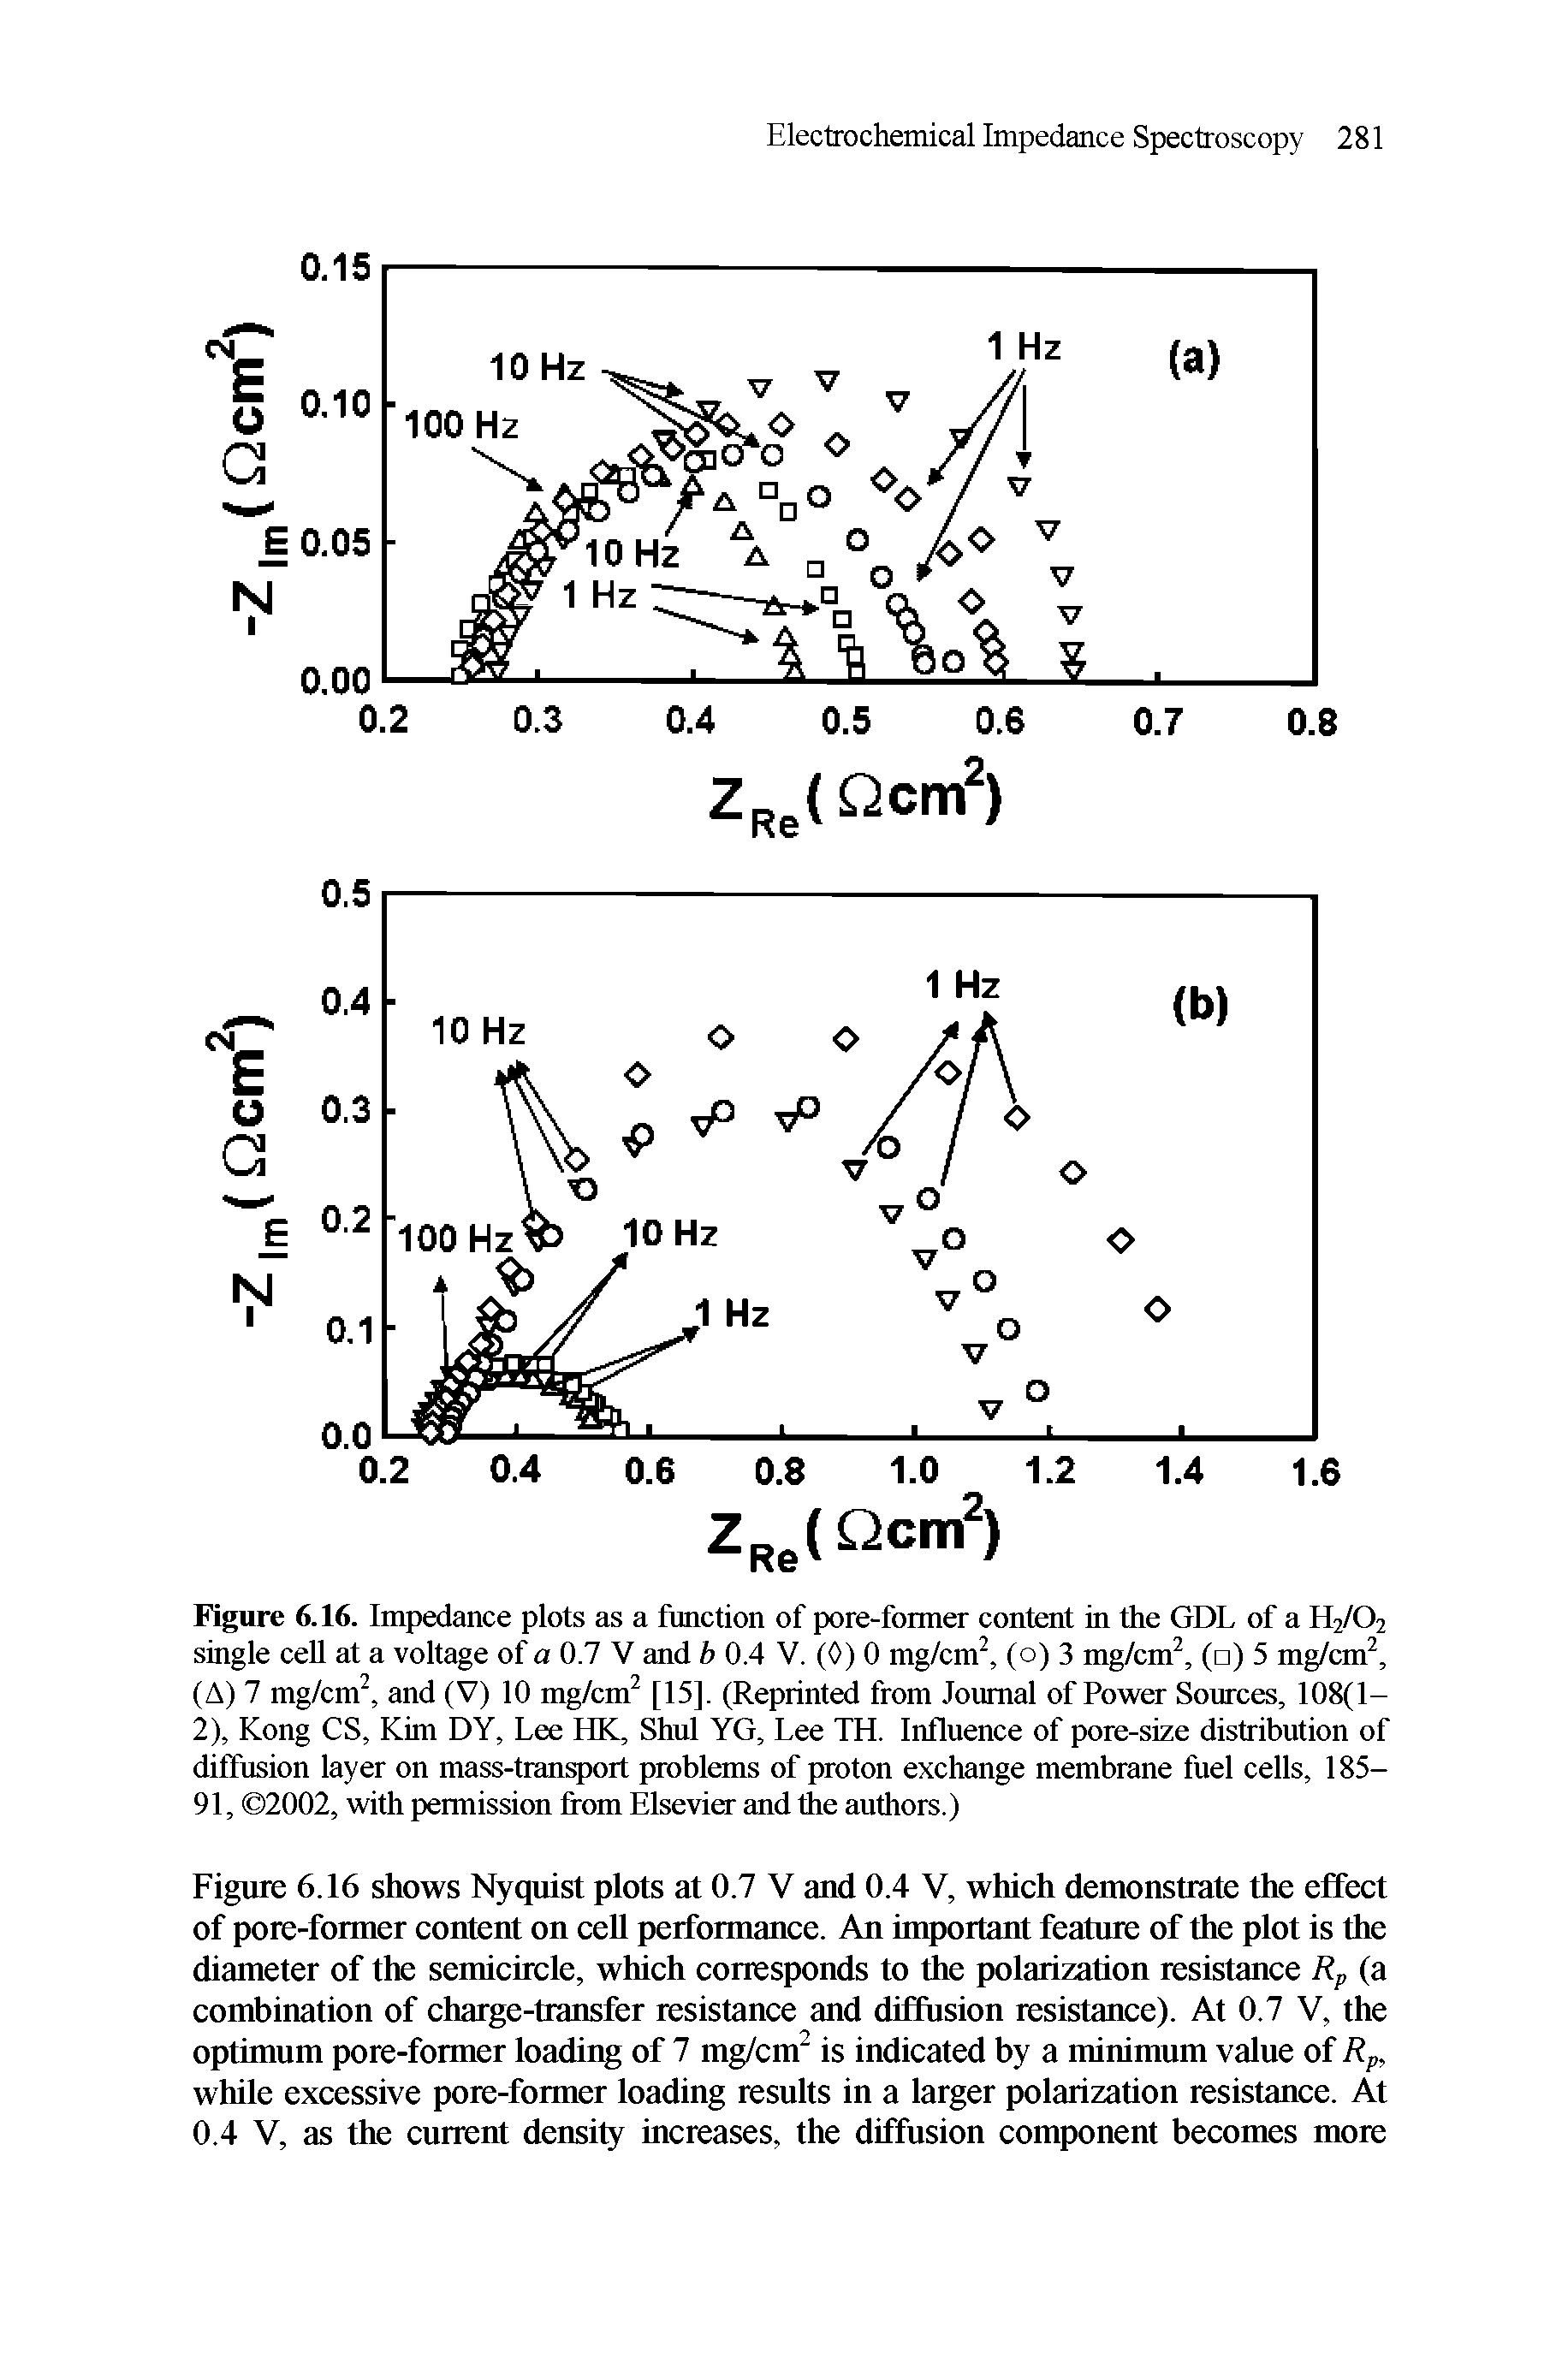 Figure 6.16. Impedance plots as a function of pore-former content in the GDL of a H2/02 single cell at a voltage of a 0.7 V and b 0.4 V. (0) 0 mg/cm2, (o) 3 mg/cm2, ( ) 5 mg/cm2, (A) 7 mg/cm2, and (V) 10 mg/cm2 [15]. (Reprinted from Journal of Power Sources, 108(1— 2), Kong CS, Kim DY, Lee HK, Shul YG, Lee TH. Influence of pore-size distribution of diffusion layer on mass-transport problems of proton exchange membrane fuel cells, 185-91, 2002, with permission from Elsevier and the authors.)...